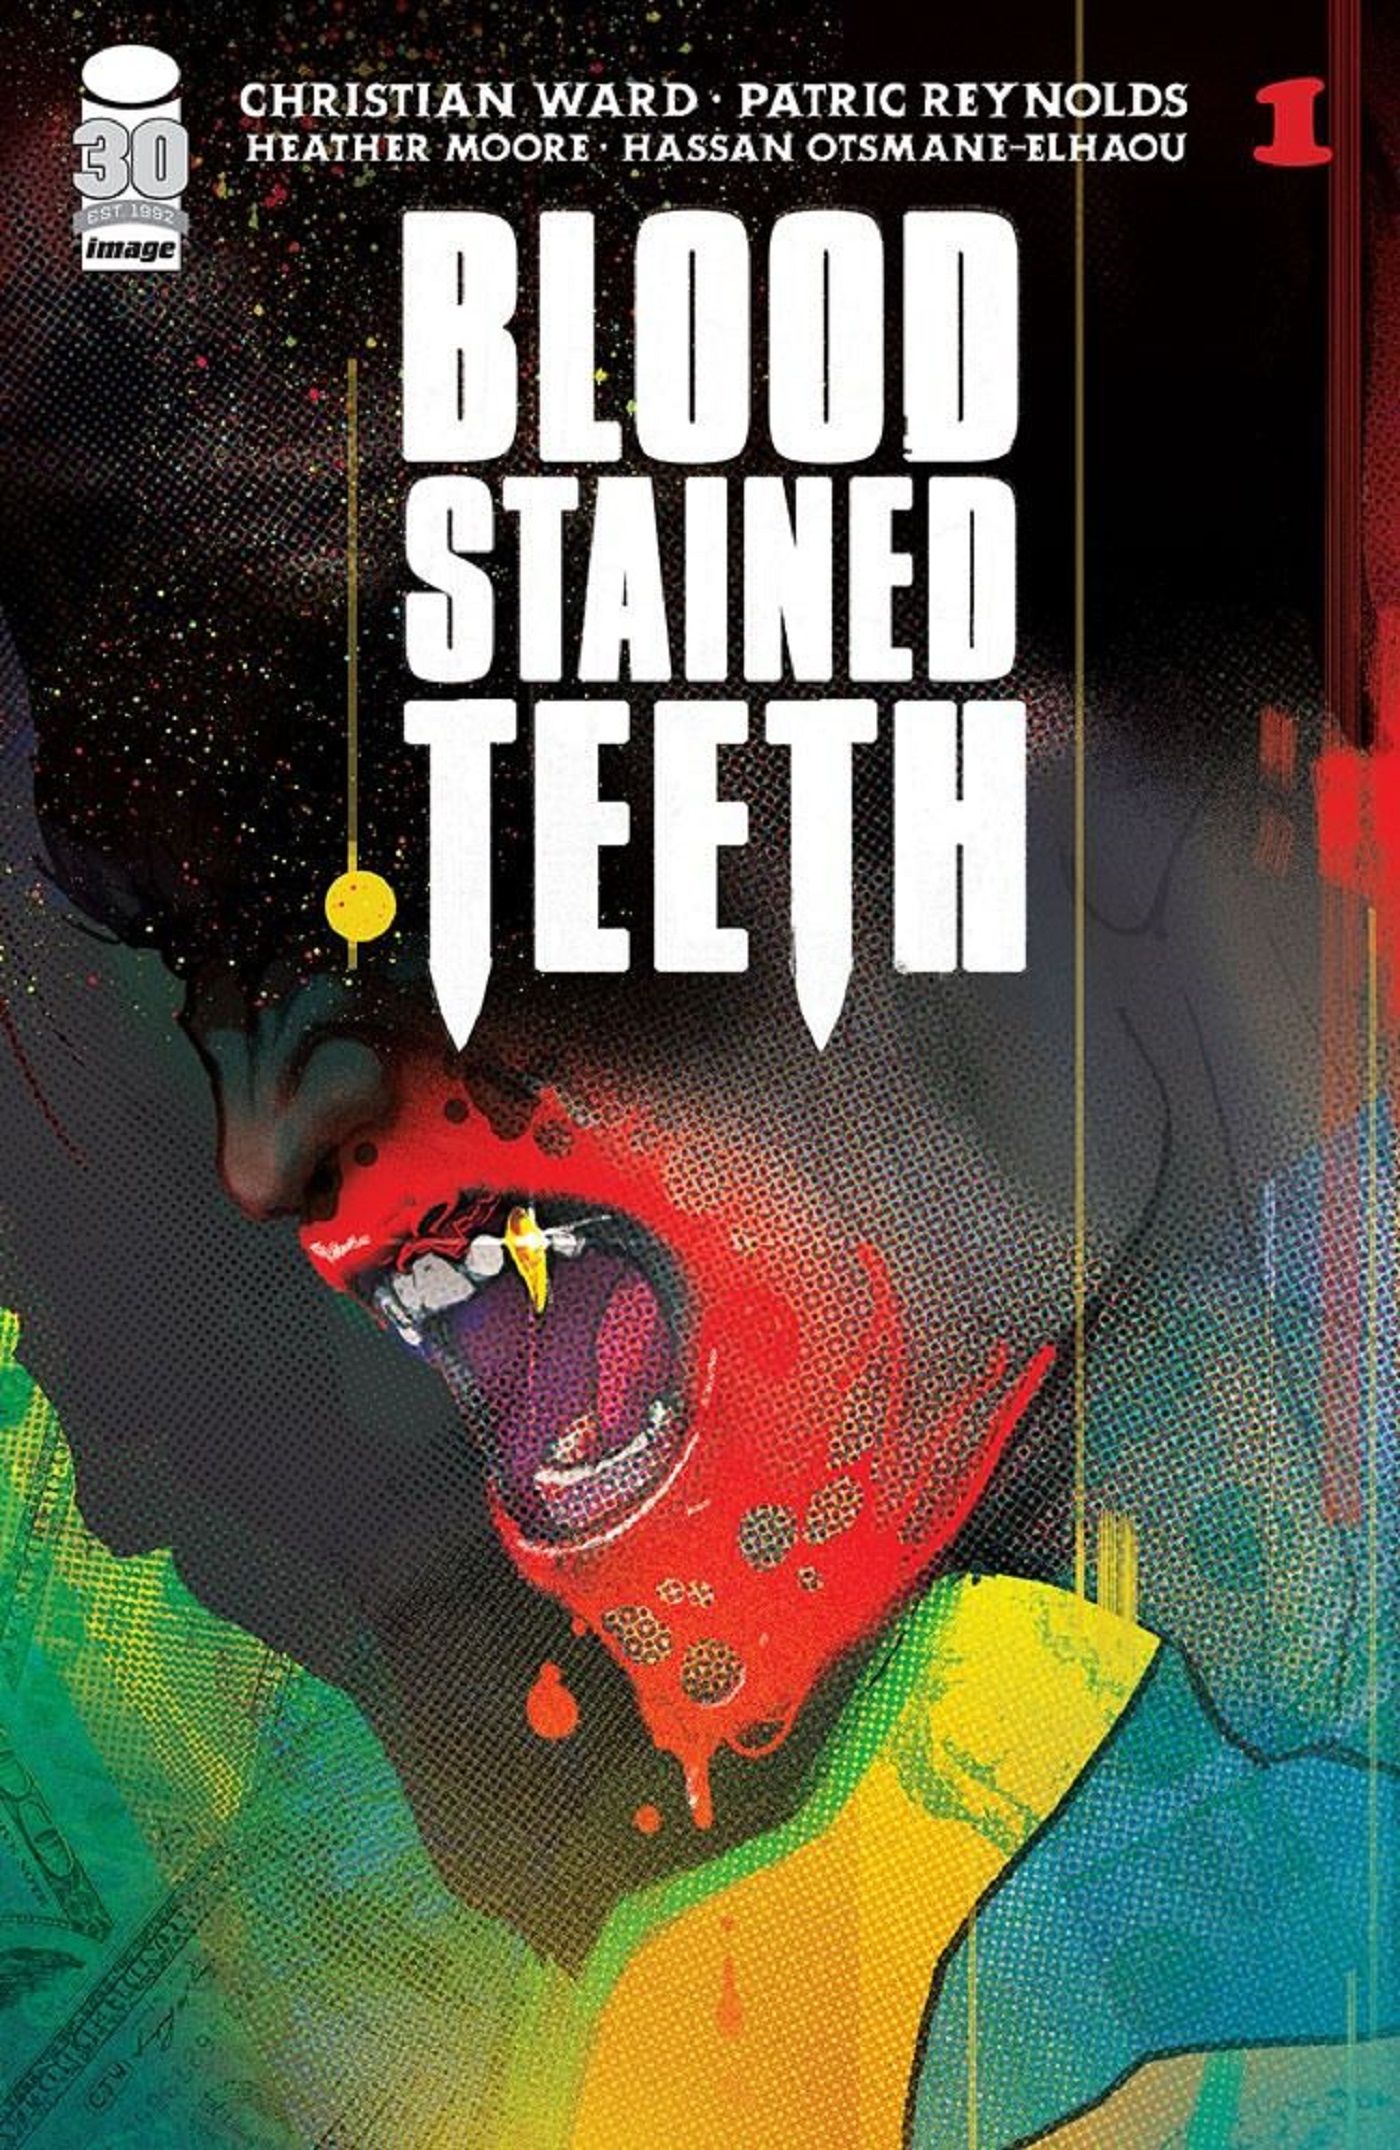 Blood-Stained Teeth #1 Cover A